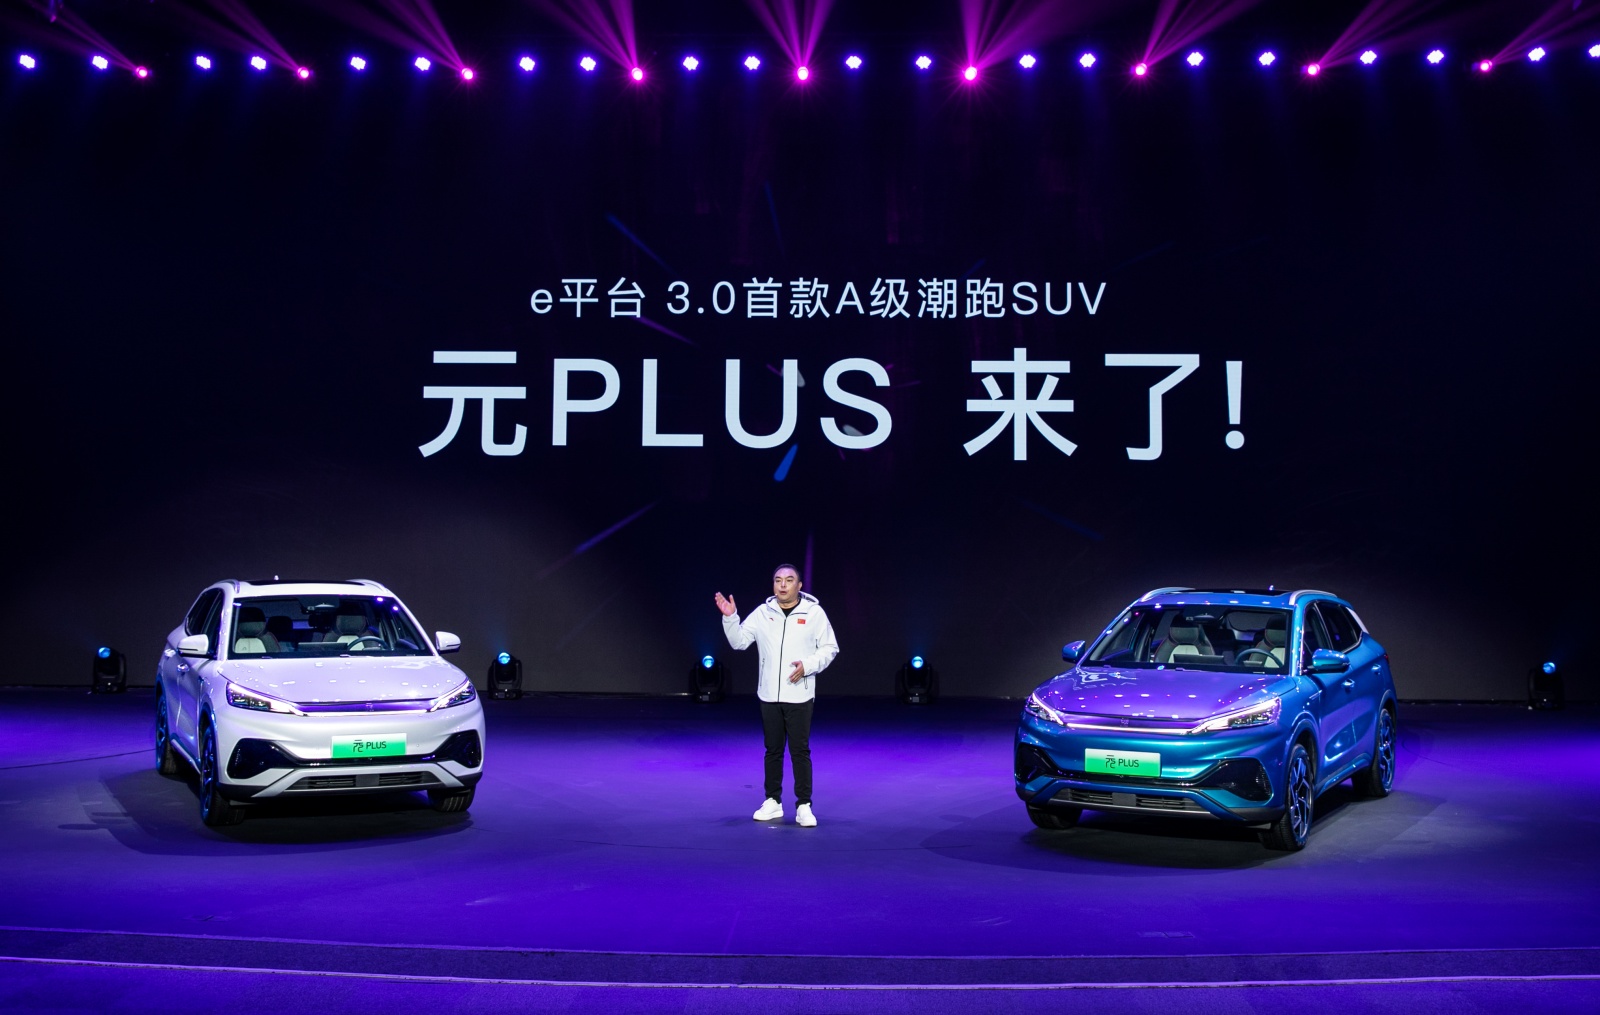 The BYD Yuan Plus Ev launch in China